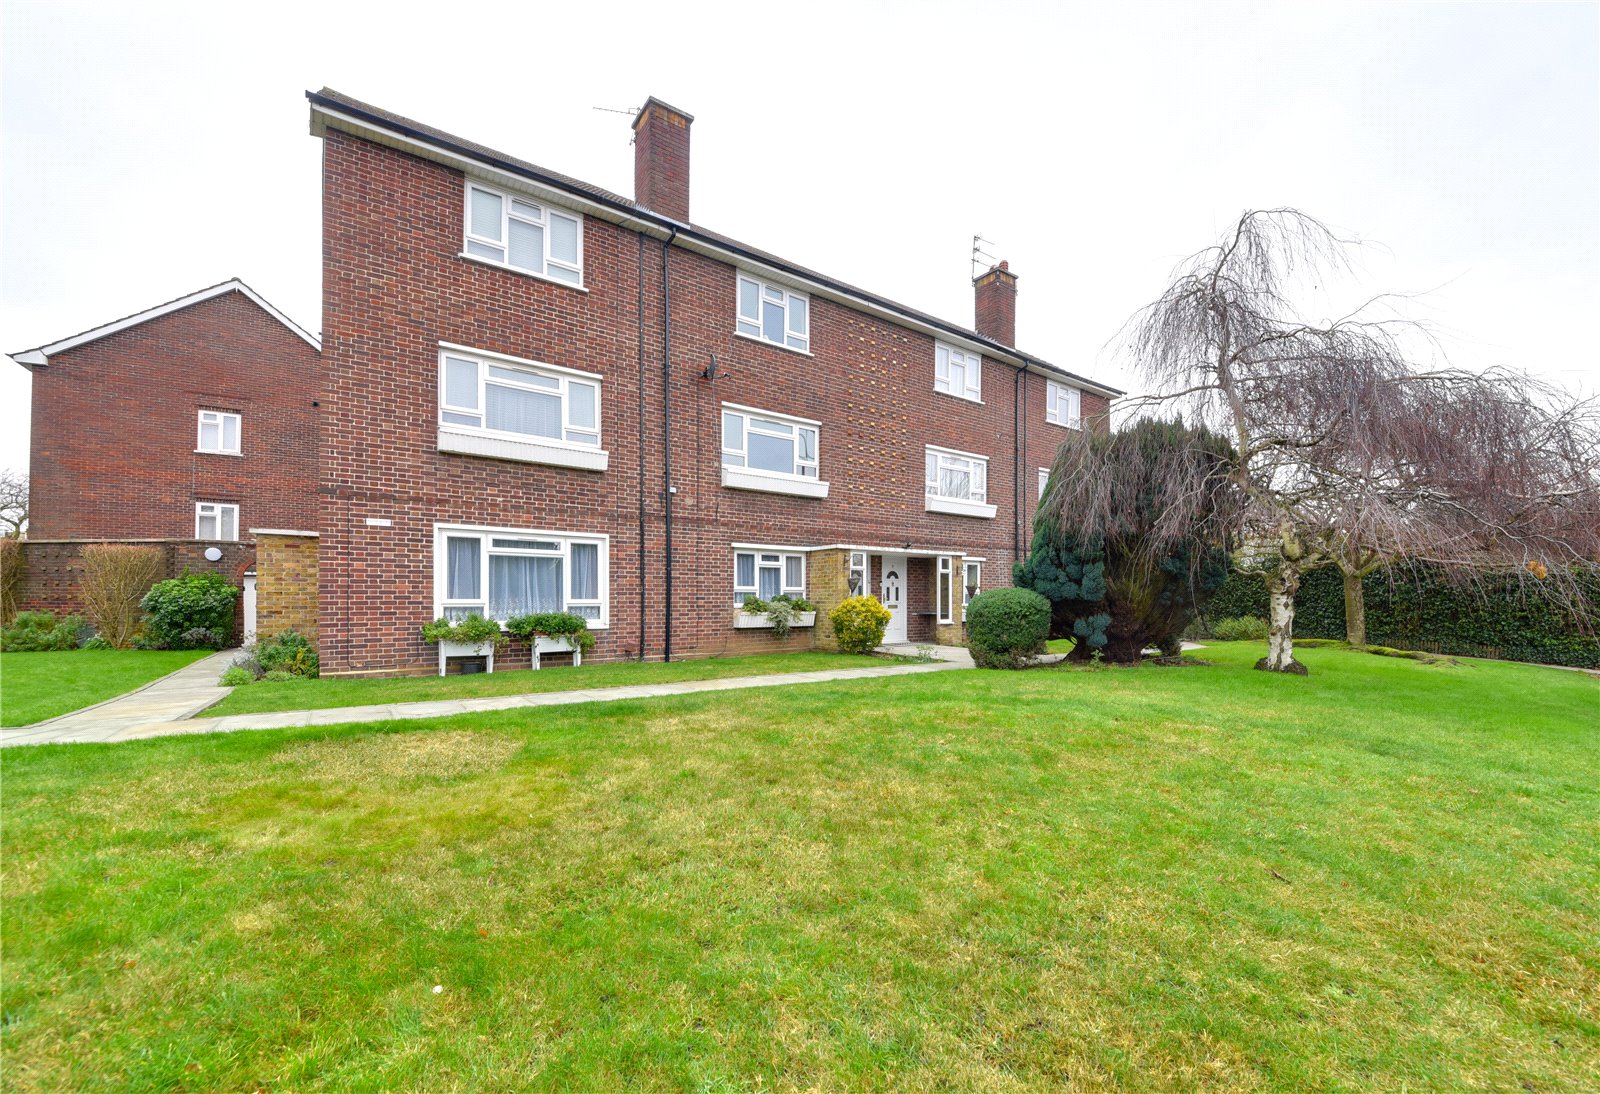 2 bed maisonette to rent in High Street, Bushey, WD23